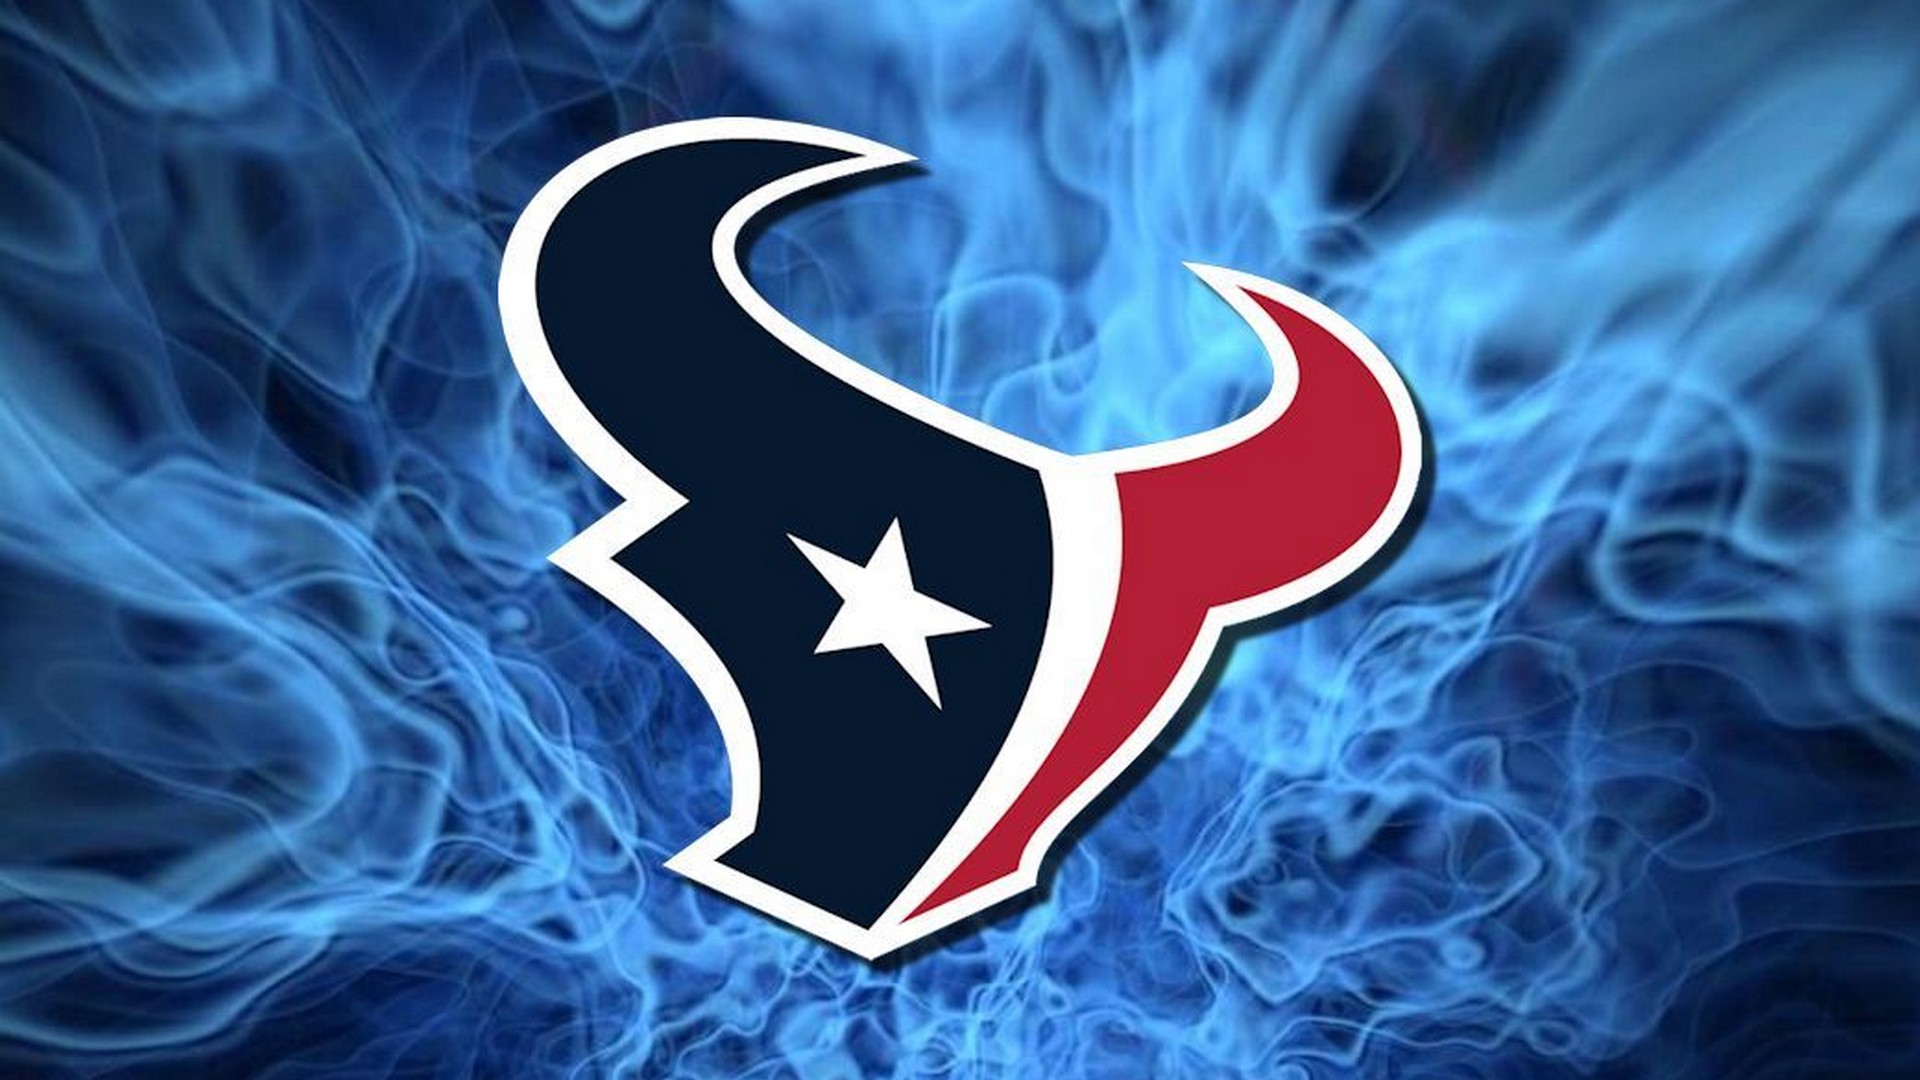 Houston Texans NFL For PC Wallpaper with resolution 1920x1080 pixel. You can make this wallpaper for your Mac or Windows Desktop Background, iPhone, Android or Tablet and another Smartphone device